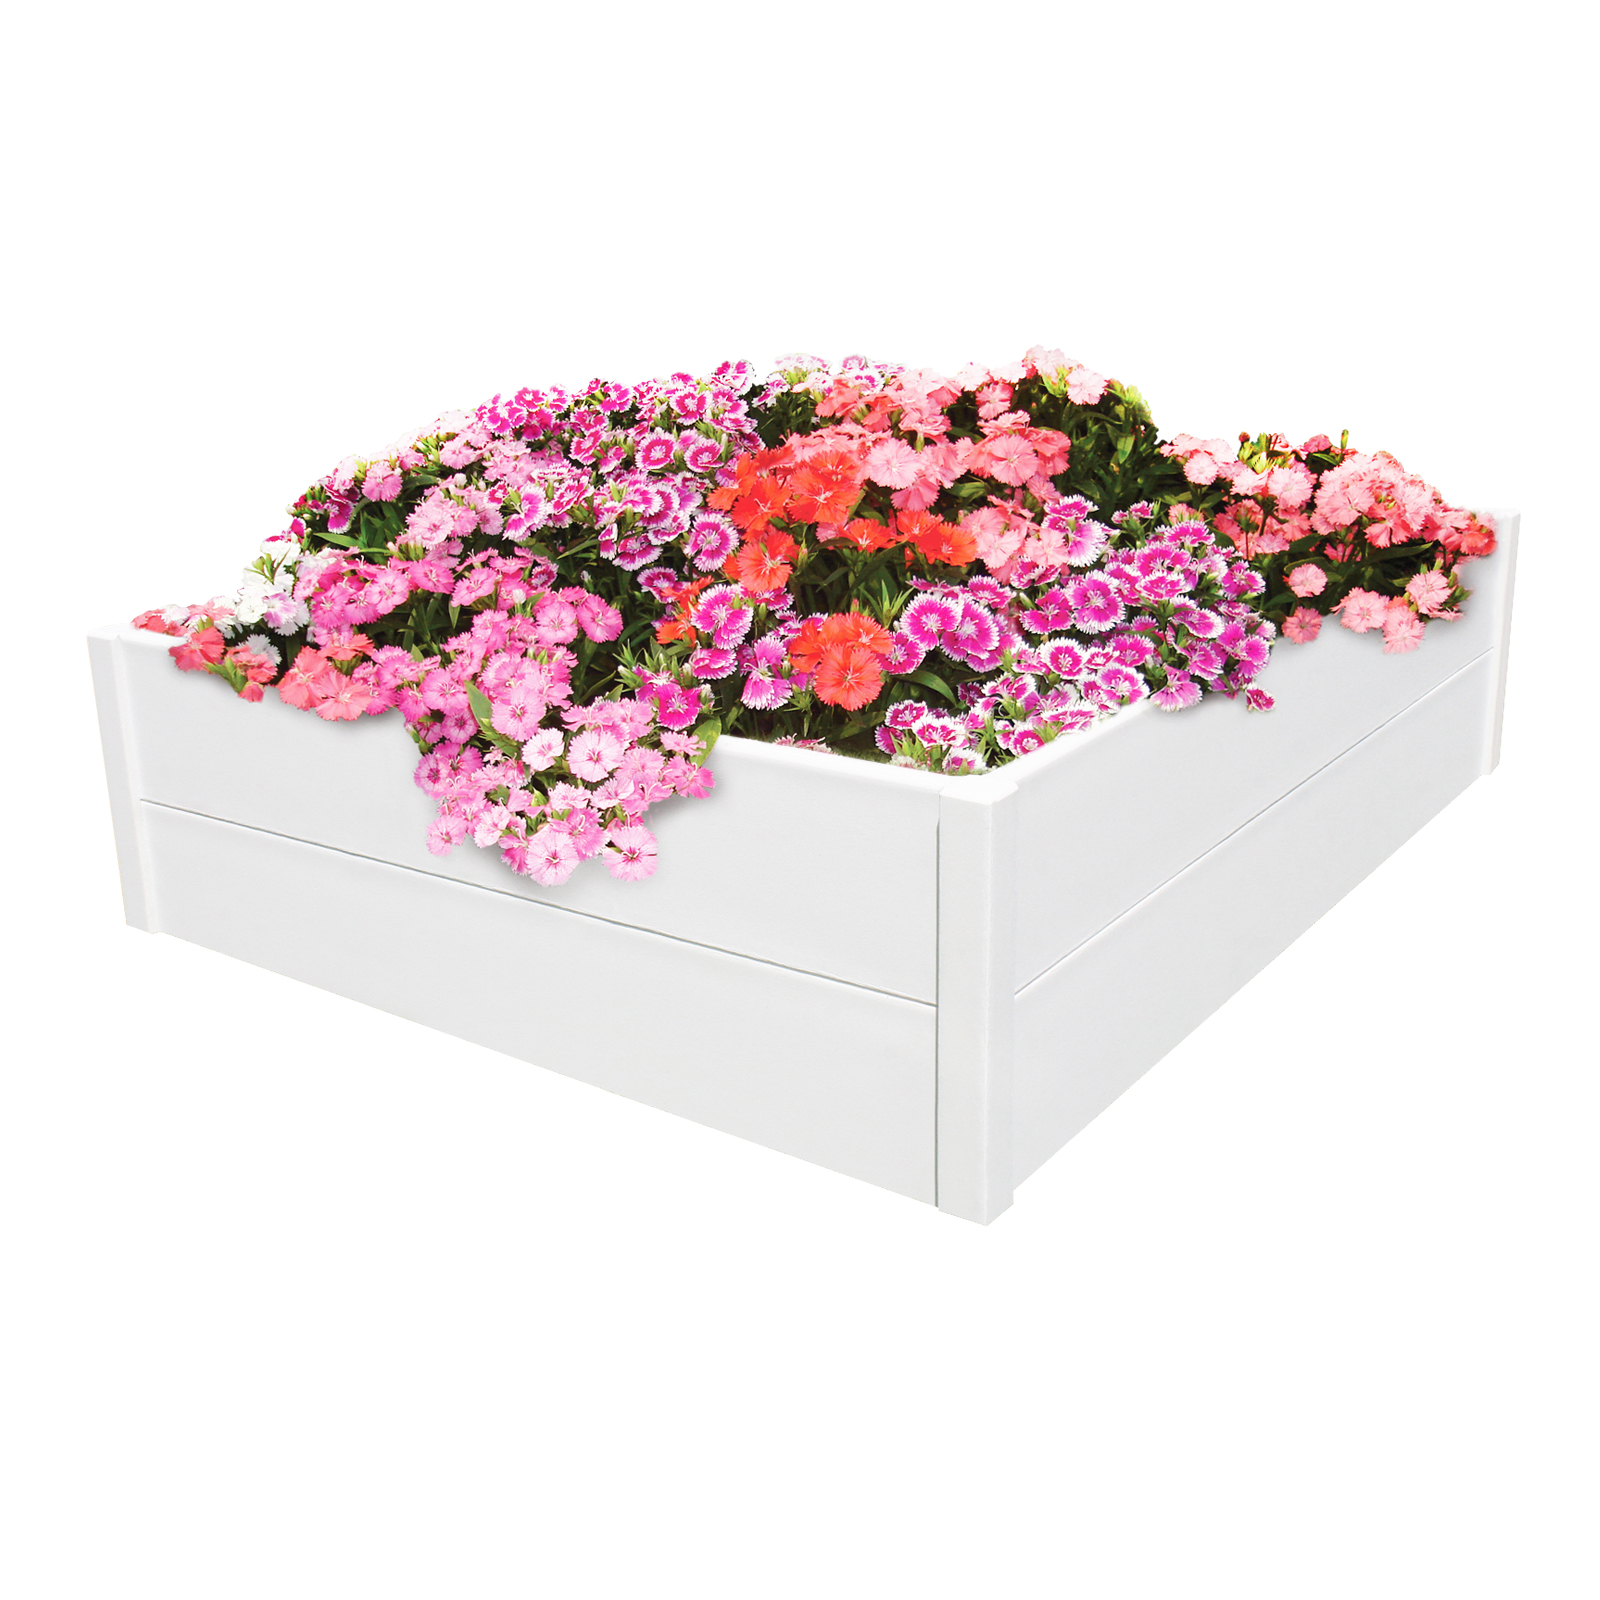 Raised Garden and Sand Commercial Grade Box 2 Tier, White